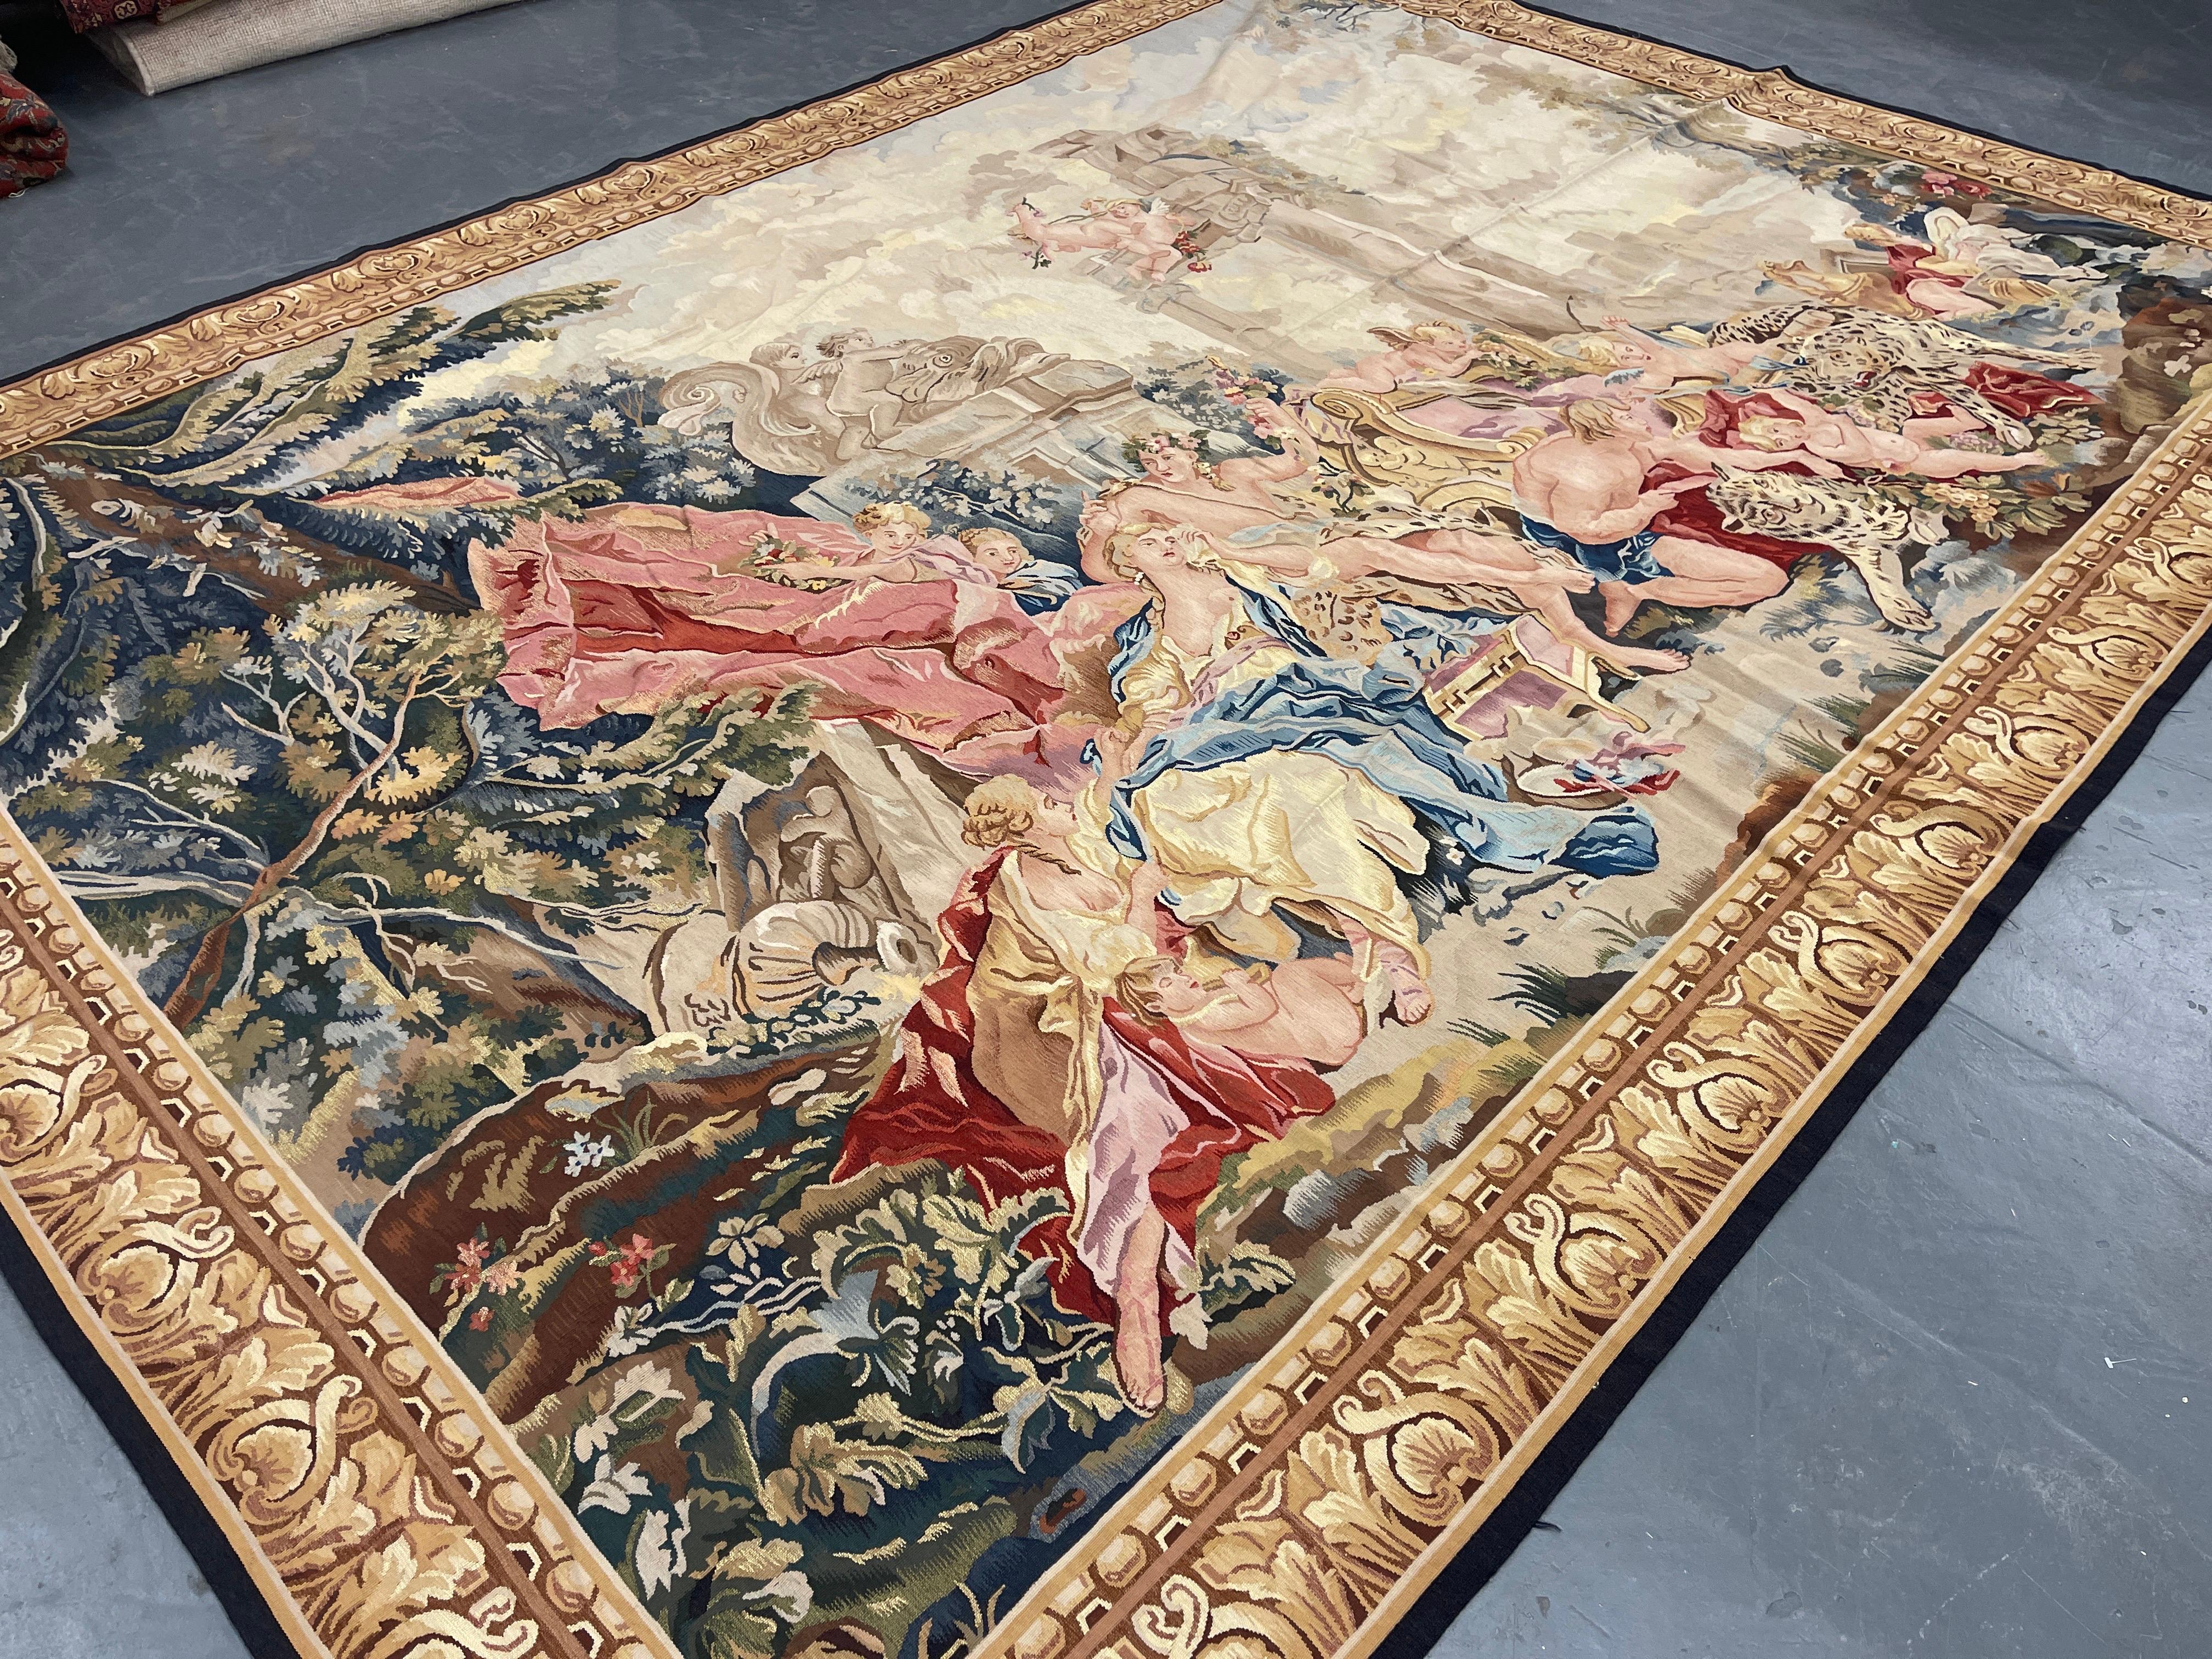 A fabulous 20th-century handwoven tapestry in excellent condition. The scene of celebration among nature. A similar technique is used for making the tapestry, as in Aubusson and Needlepoint in the flat weave role. These decorative area rugs are